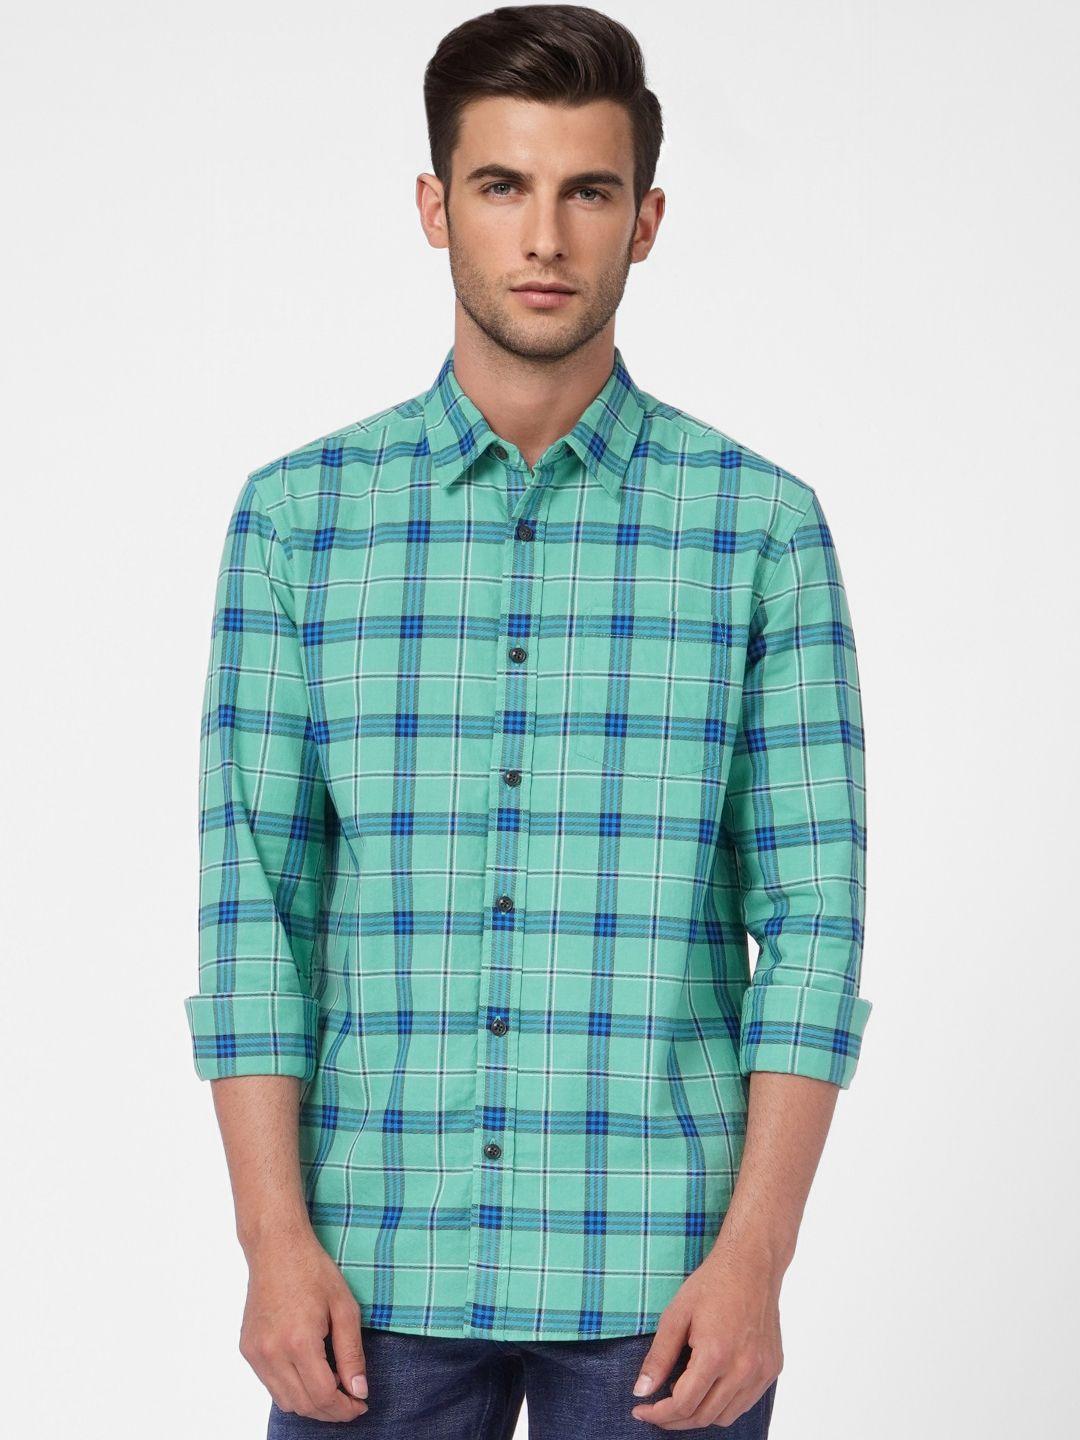 jack & jones men green and blue checked pure cotton casual shirt